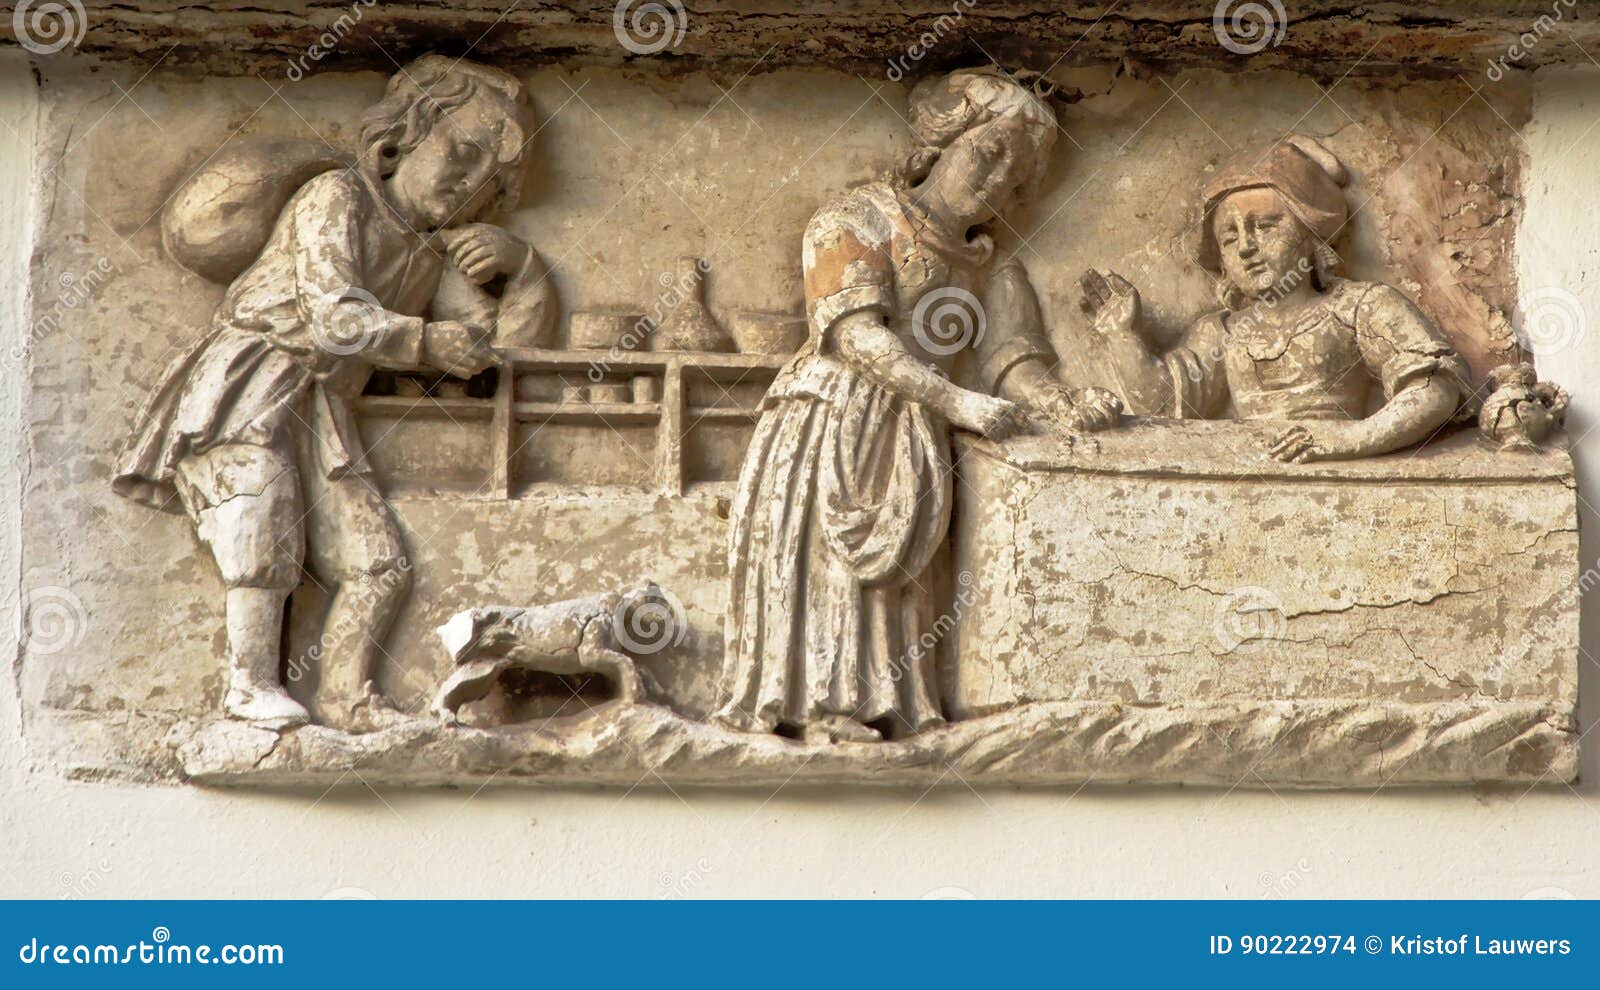 bas-relief showing a medieval bakery shop